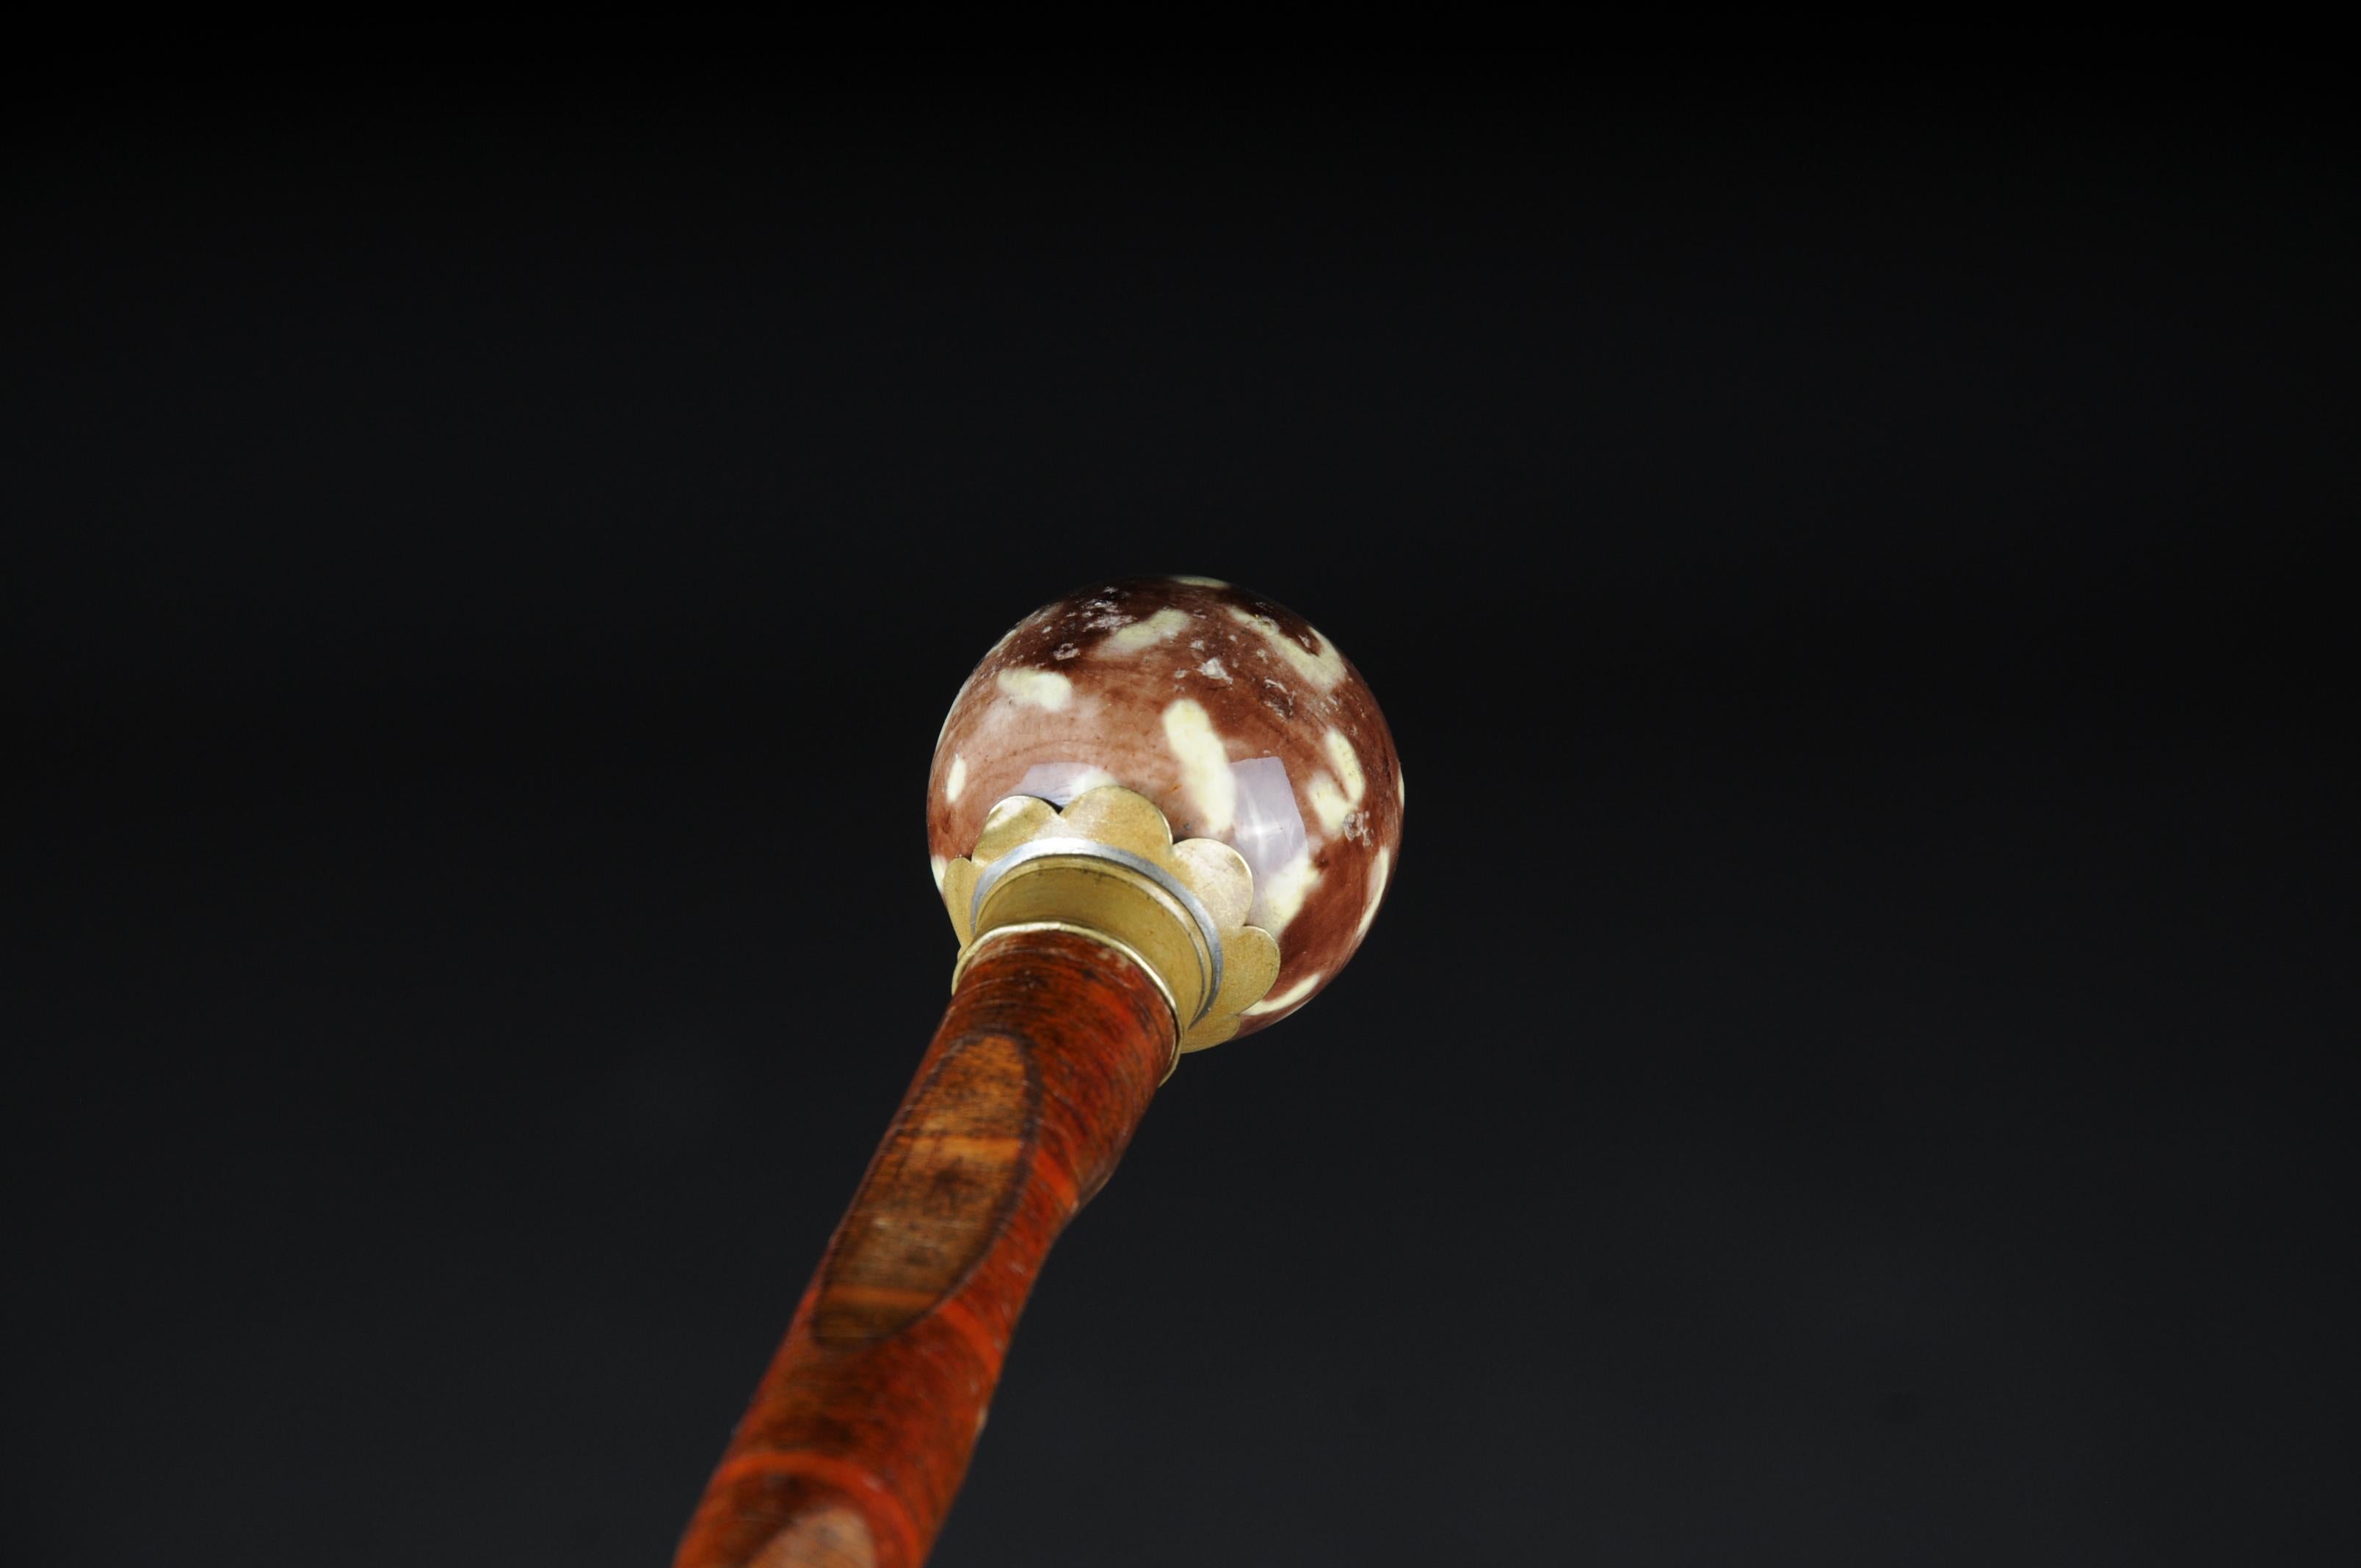 Walking Stick / Cane, Germany with Around 1910 For Sale 2